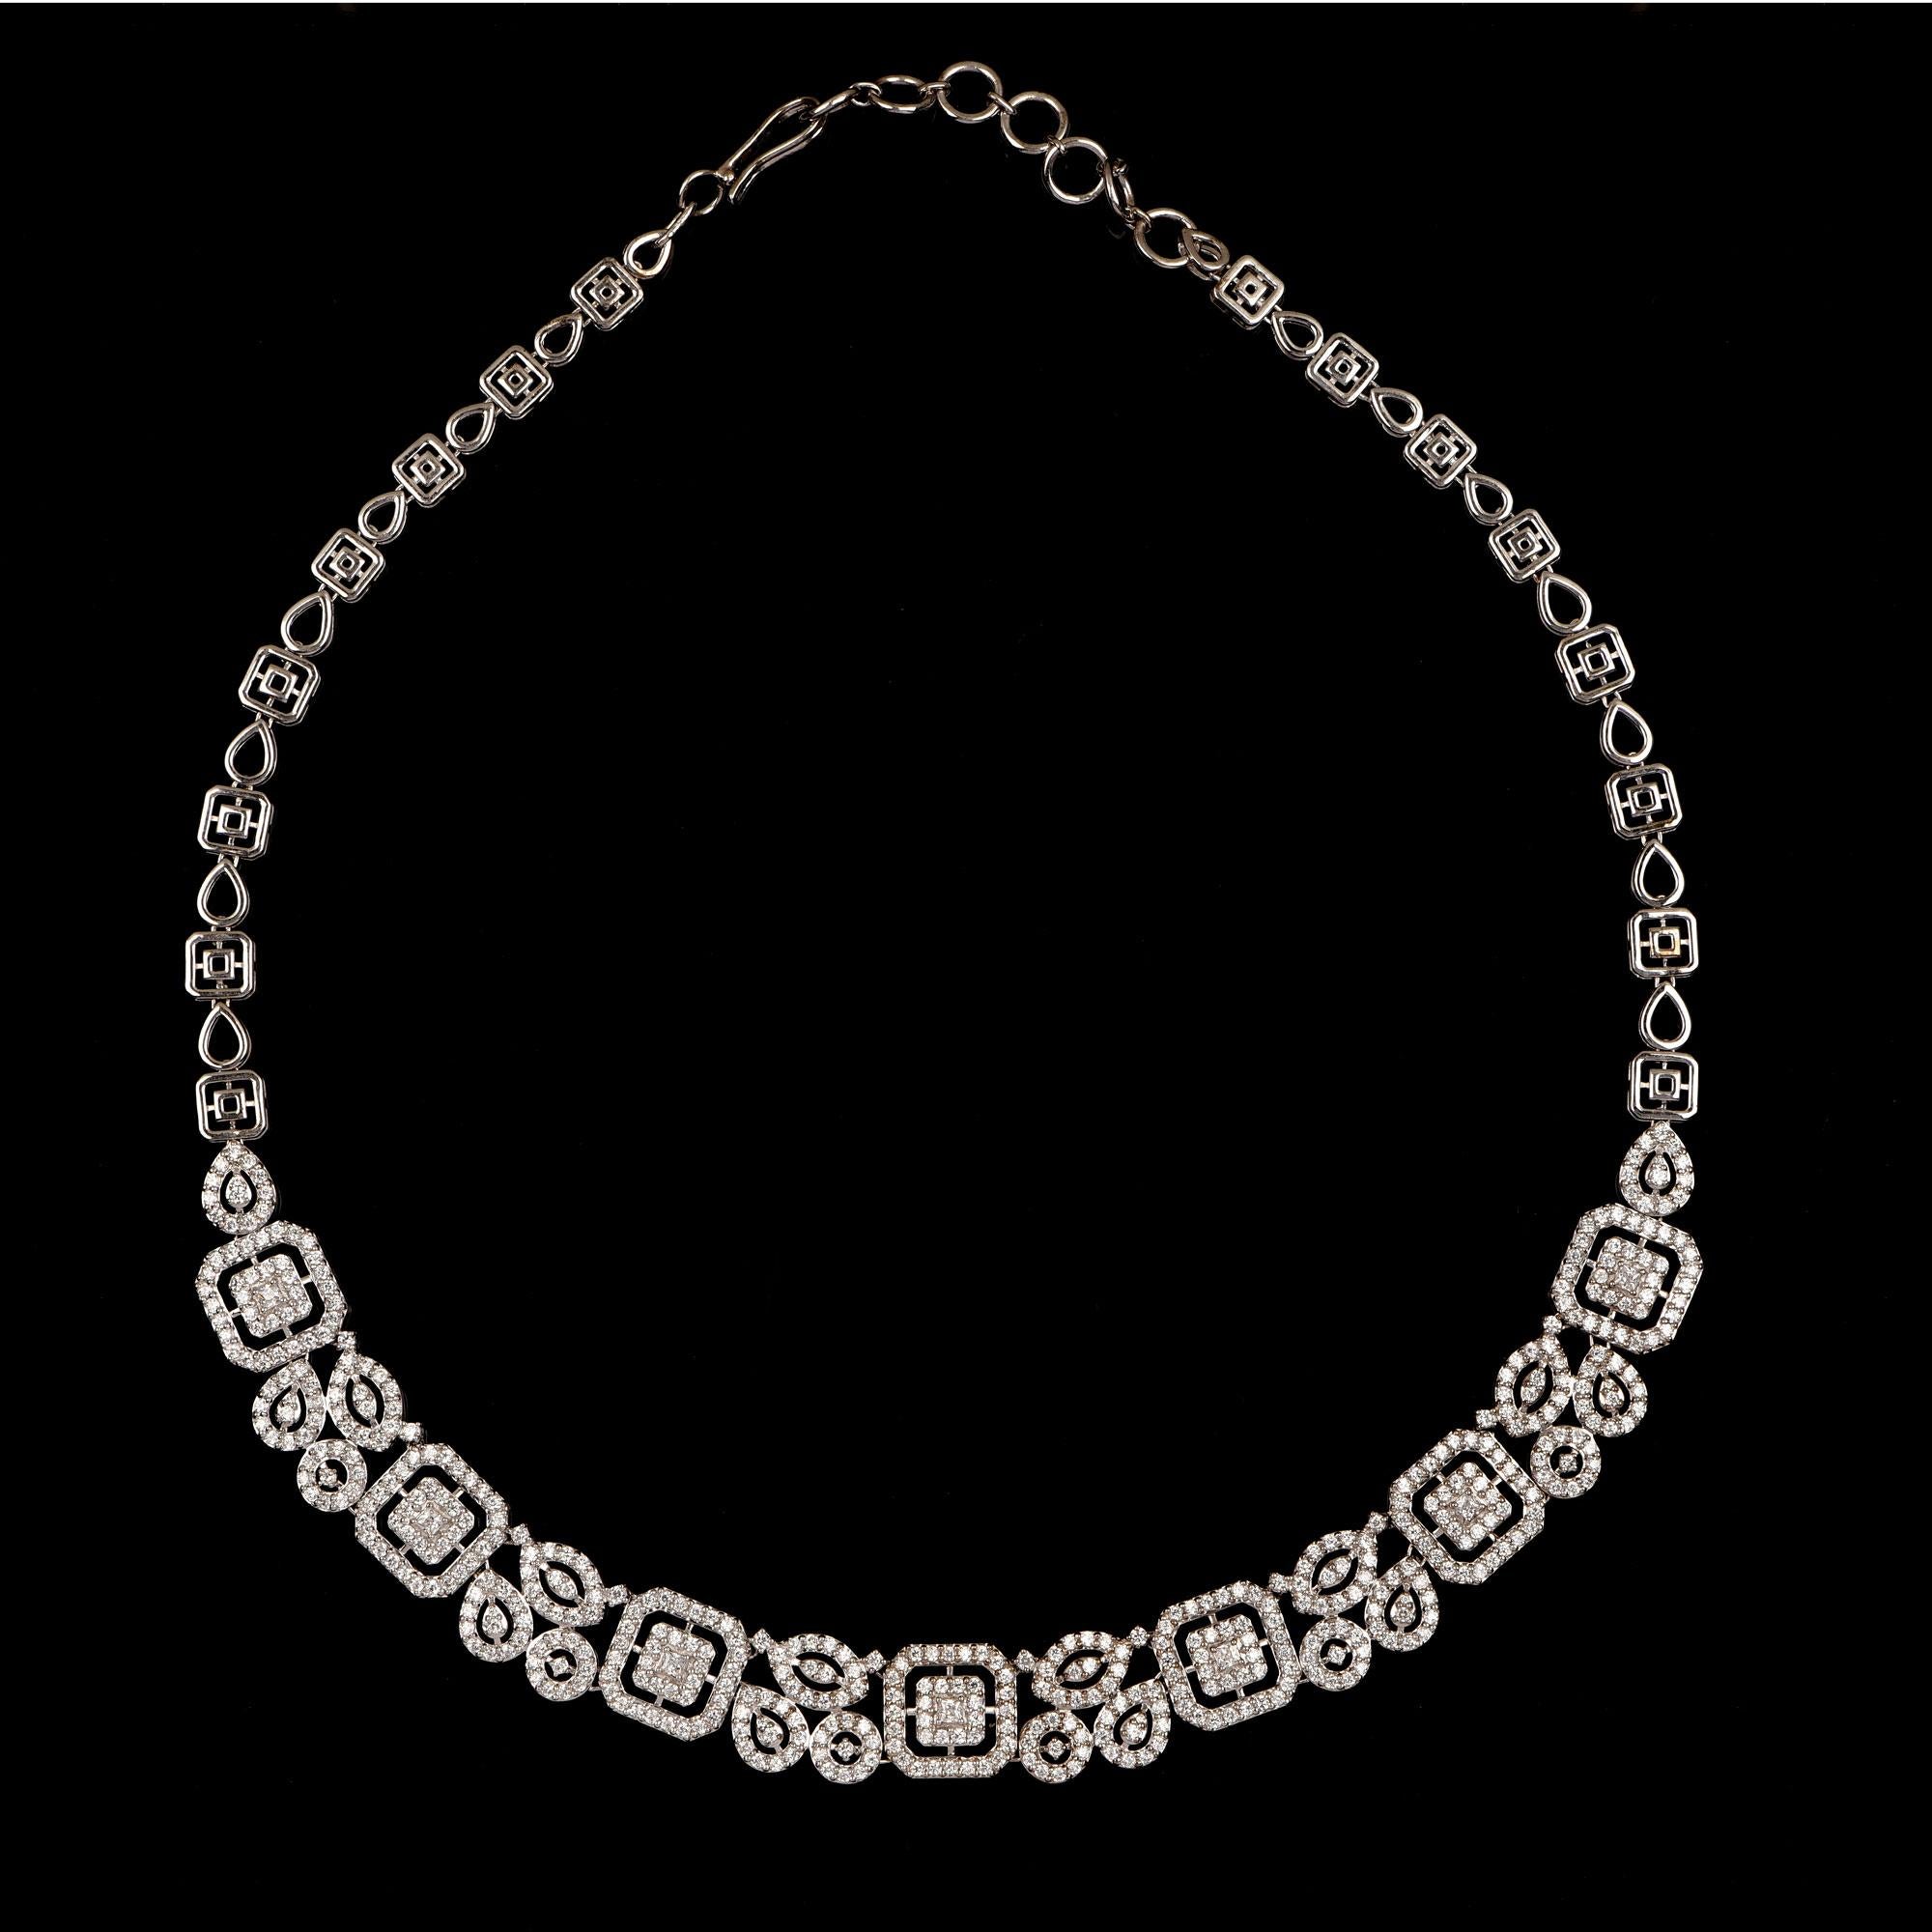 Exquisite and elegant, perfect for holiday gifting. This designer necklace features 518 brilliant cut and 7 princess-cut diamonds elegantly set in prong setting and is hand-crafted in 18 Karat white gold. The diamonds are graded H-I Color, I2